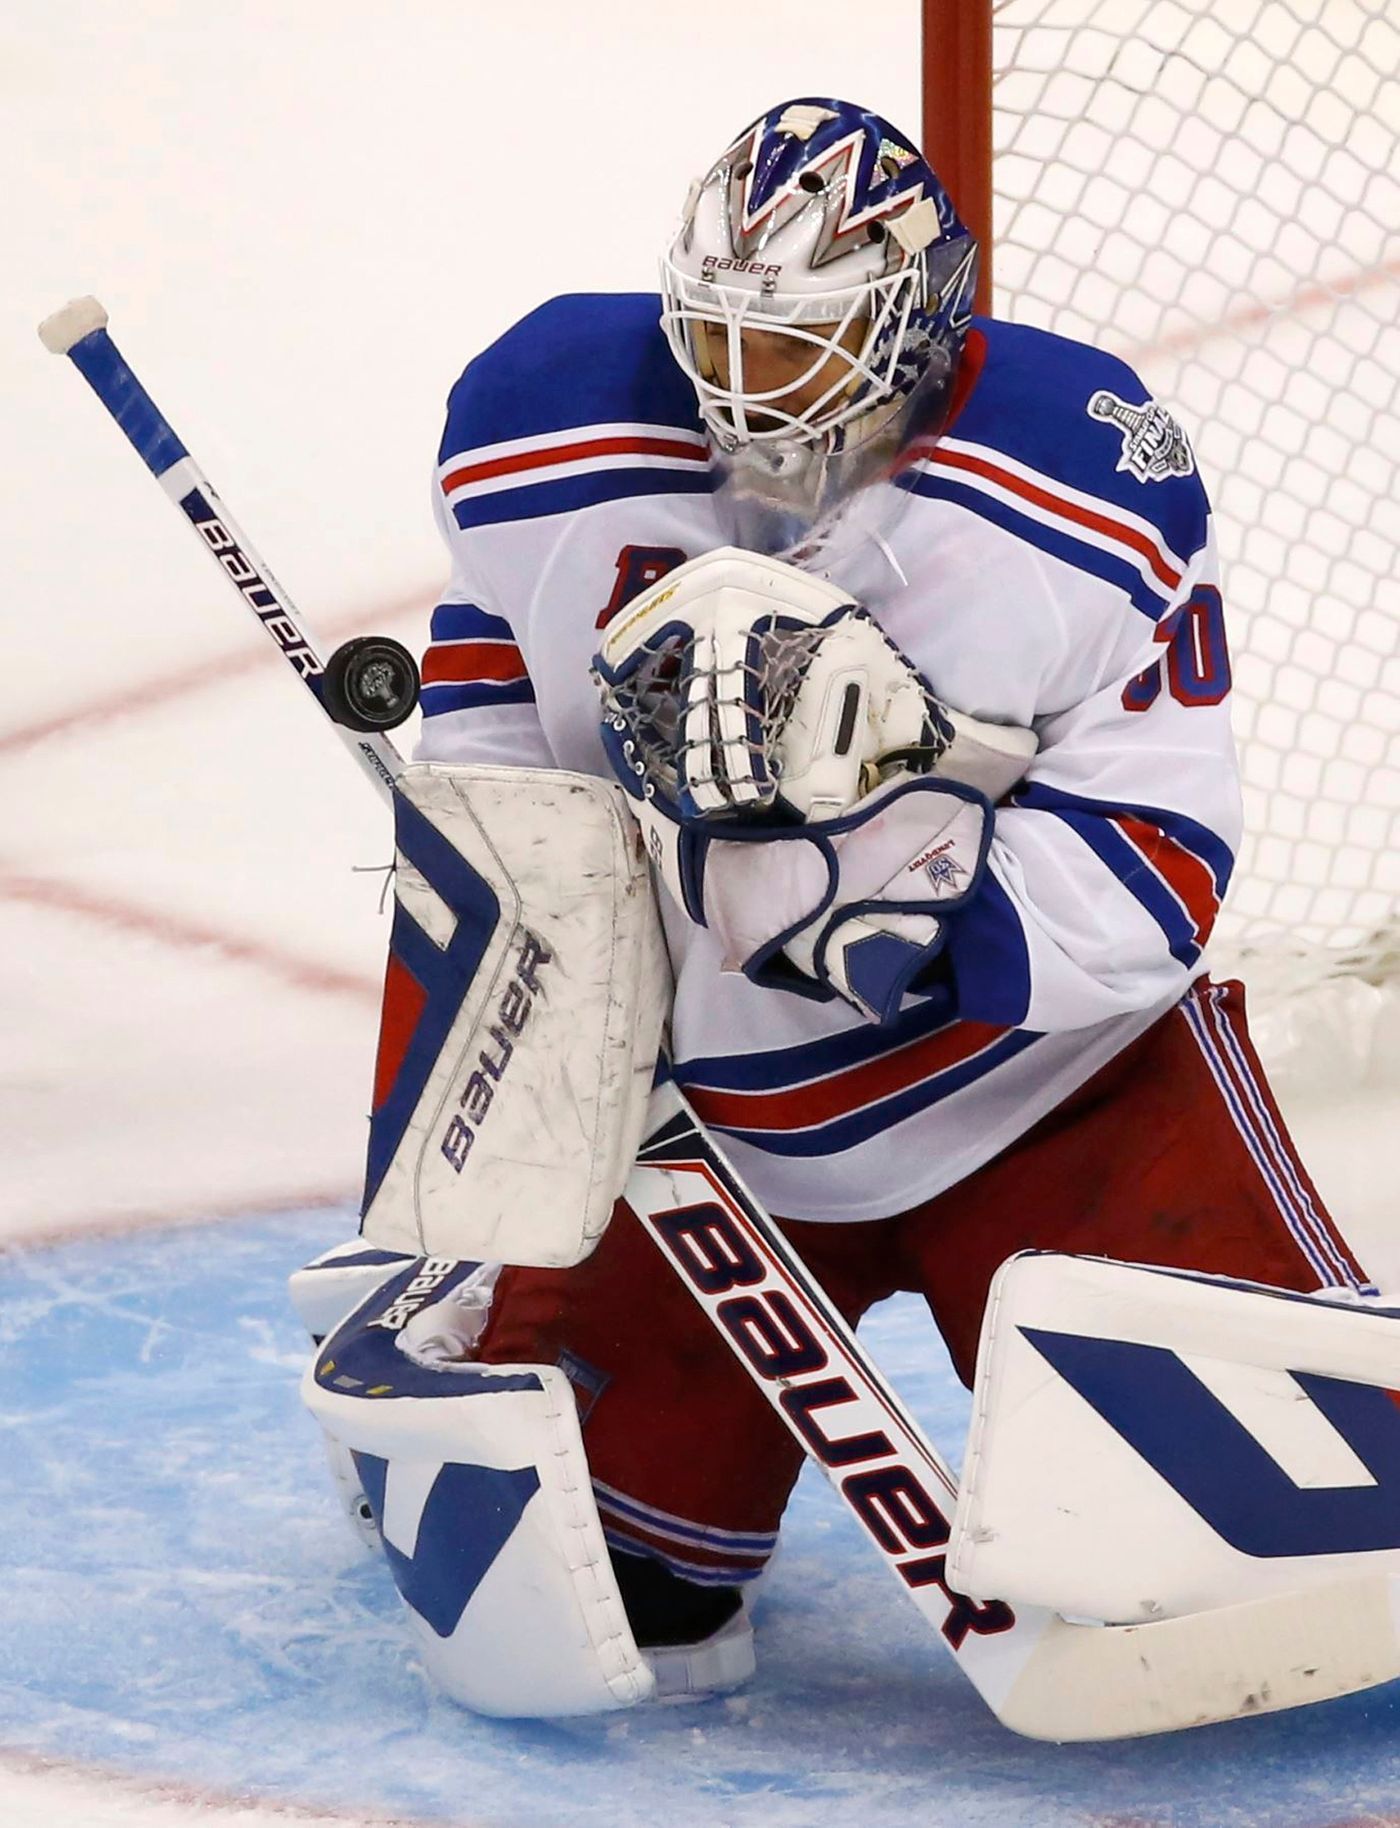 Rangers goalie Lundqvist makes a save against the Kings during the second period in Game 1 of their NHL Stanley Cup Finals hockey series in Los Angeles